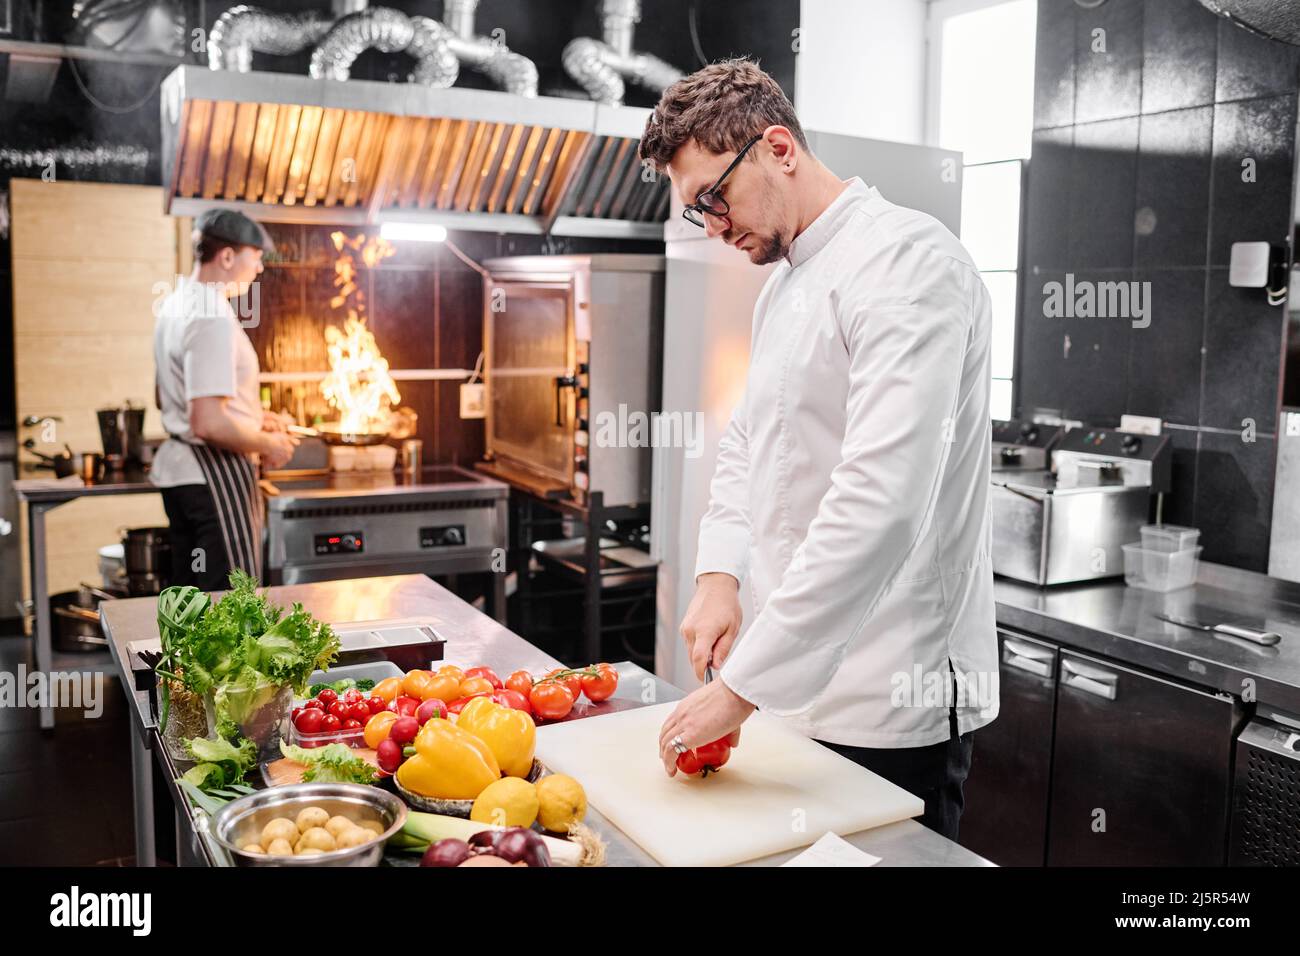 Young cook in uniform cutting vegetable on cutting board at table while his colleague using open fire to fry them Stock Photo